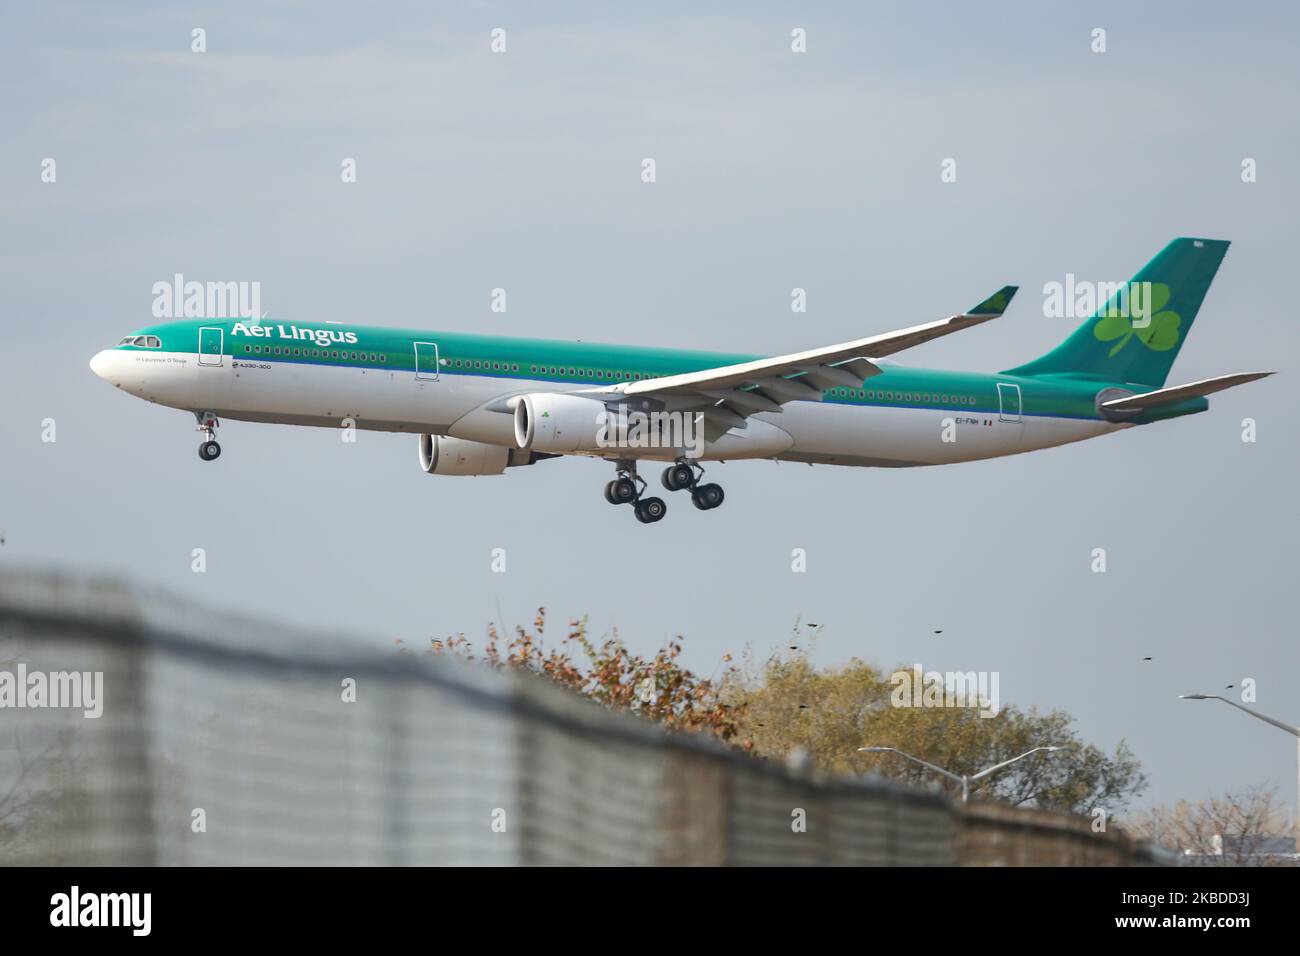 Aer Lingus Airbus A330-300 aircraft as seen on final approach landing at New York JFK John F. Kennedy International Airport on 14 November 2019. The airplane has the registration EI-FNH, 2x GE jet engines and the name St Laurence O'Toole / Lorcan O Tuathail. Aer Lingus with IATA code EI, ICAO EIN and Callsign Shamrock is the flag carrier airline of Ireland based in the Irish Capital Dublin and member of Oneworld aviation alliance. (Photo by Nicolas Economou/NurPhoto) Stock Photo